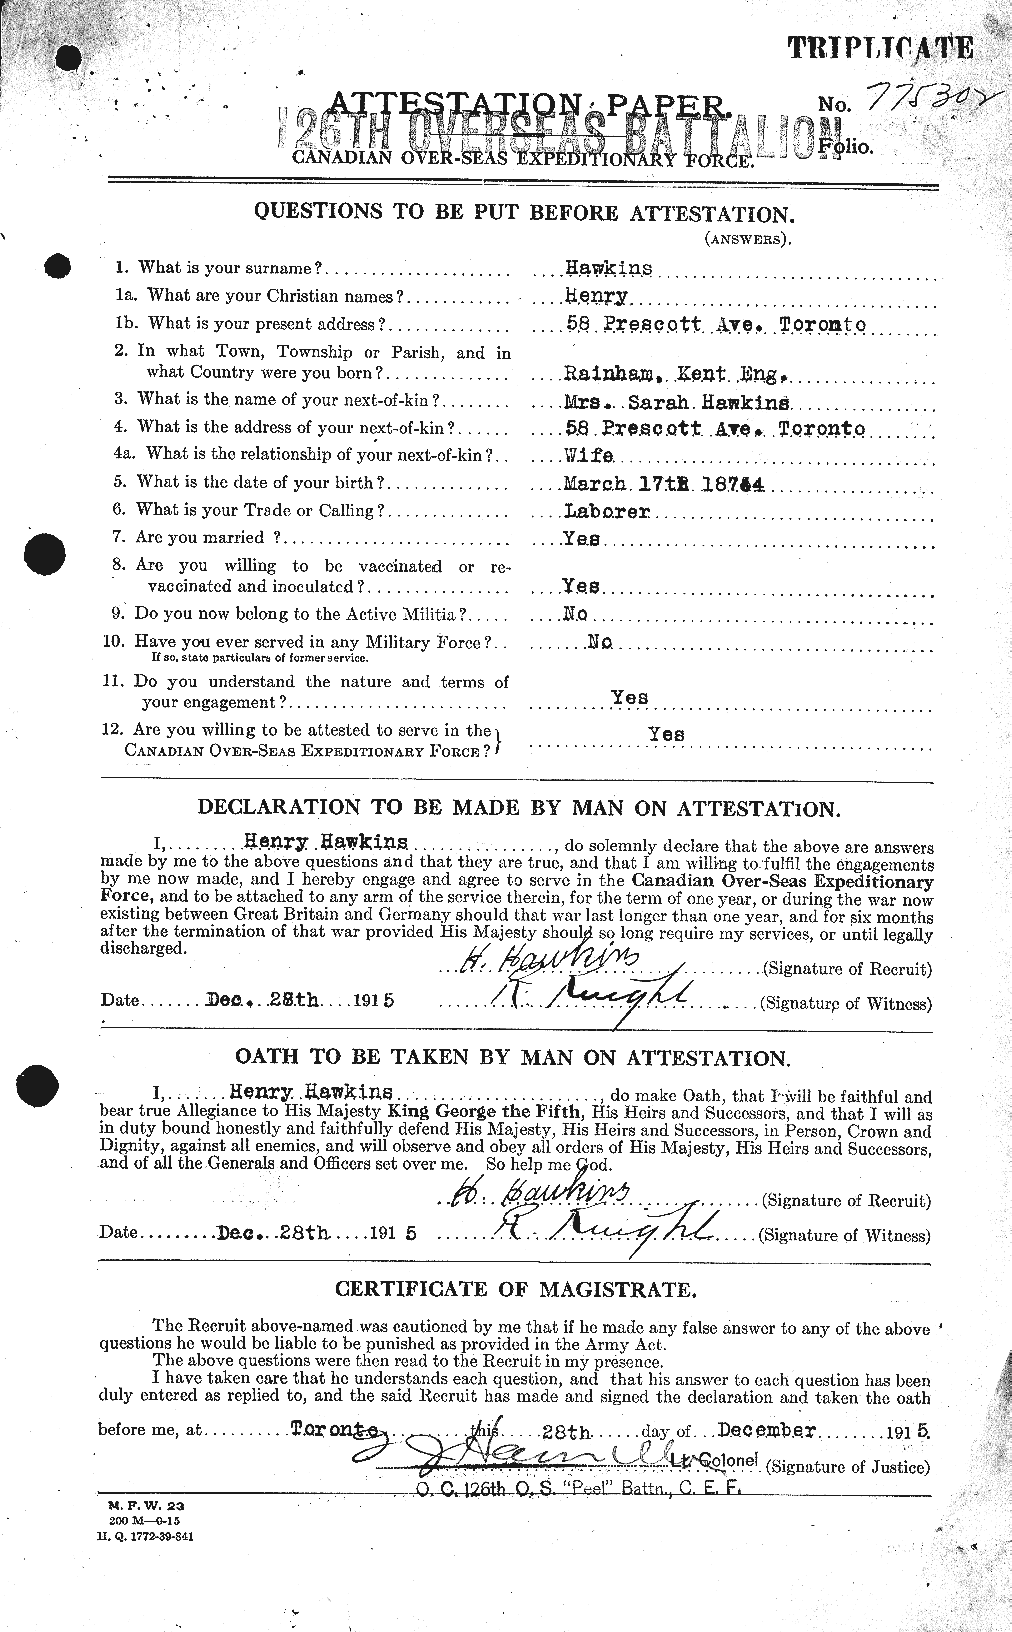 Personnel Records of the First World War - CEF 387143a